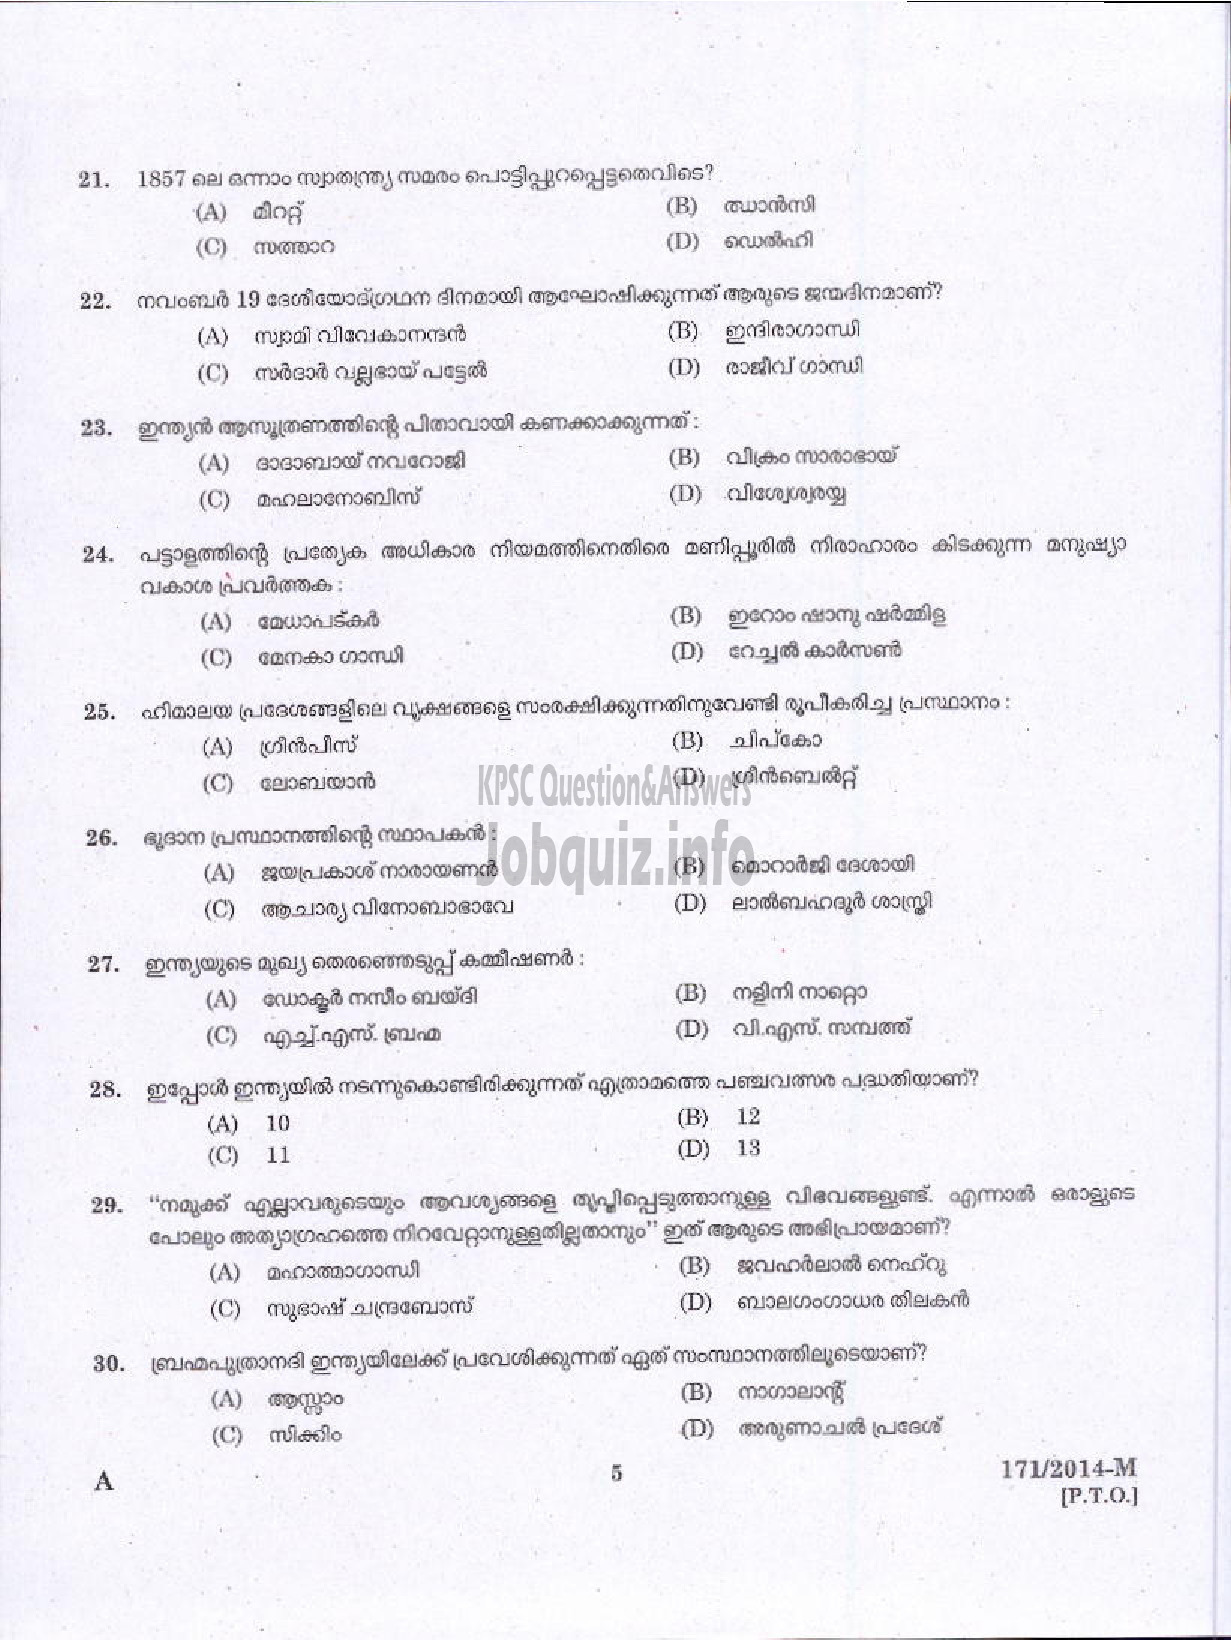 Kerala PSC Question Paper - DRIVER GR II KERALA ELECTRICAL AND ALLIED ENGINEERING COMPANY LTD ( Malayalam ) -3